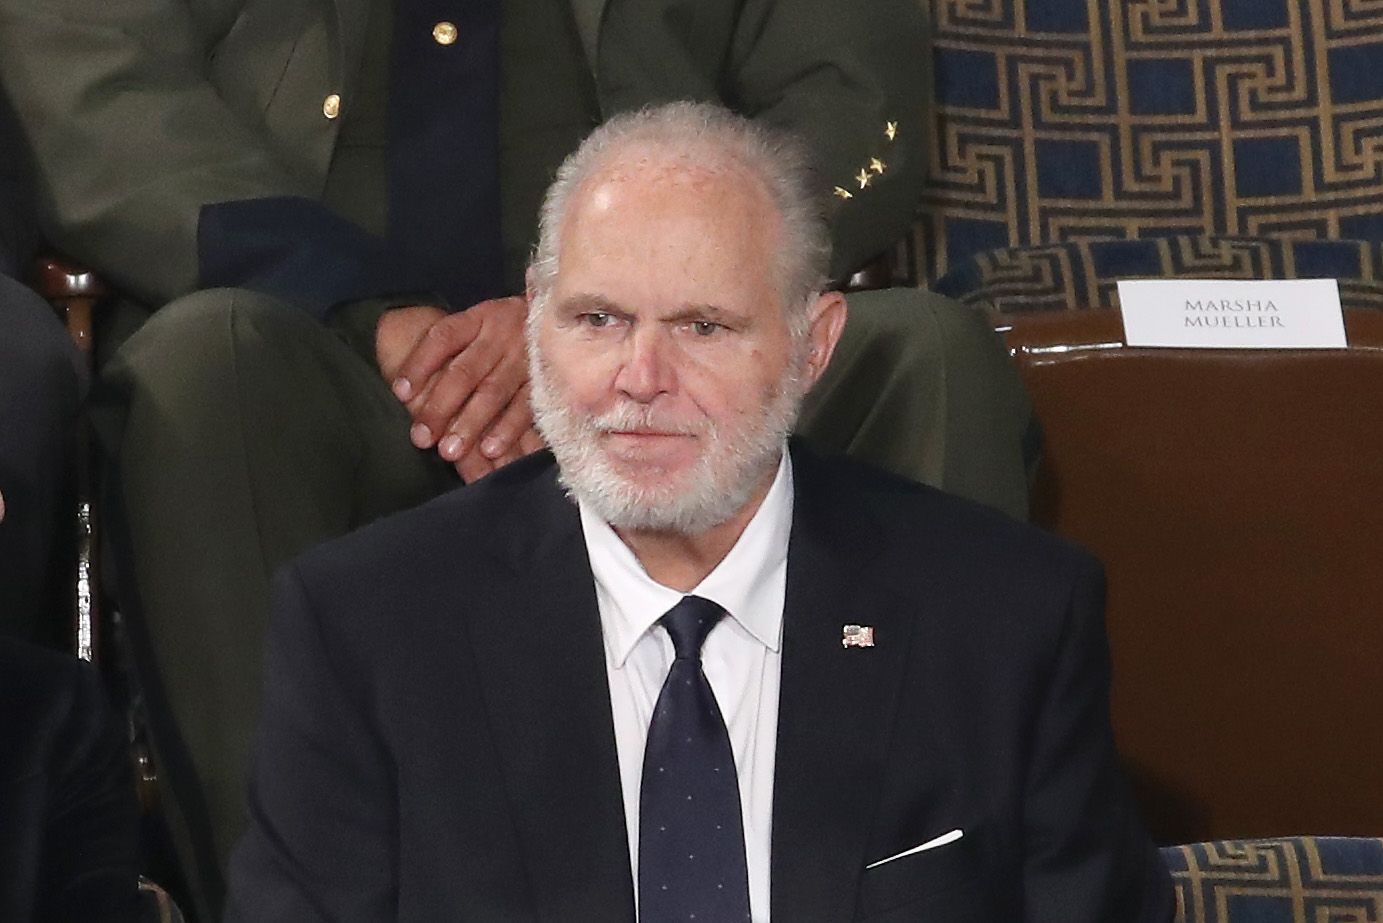 Rush Limbaugh sits in the First Lady's box ahead of the State of the Union address on February 04, 2020 | Getty Images